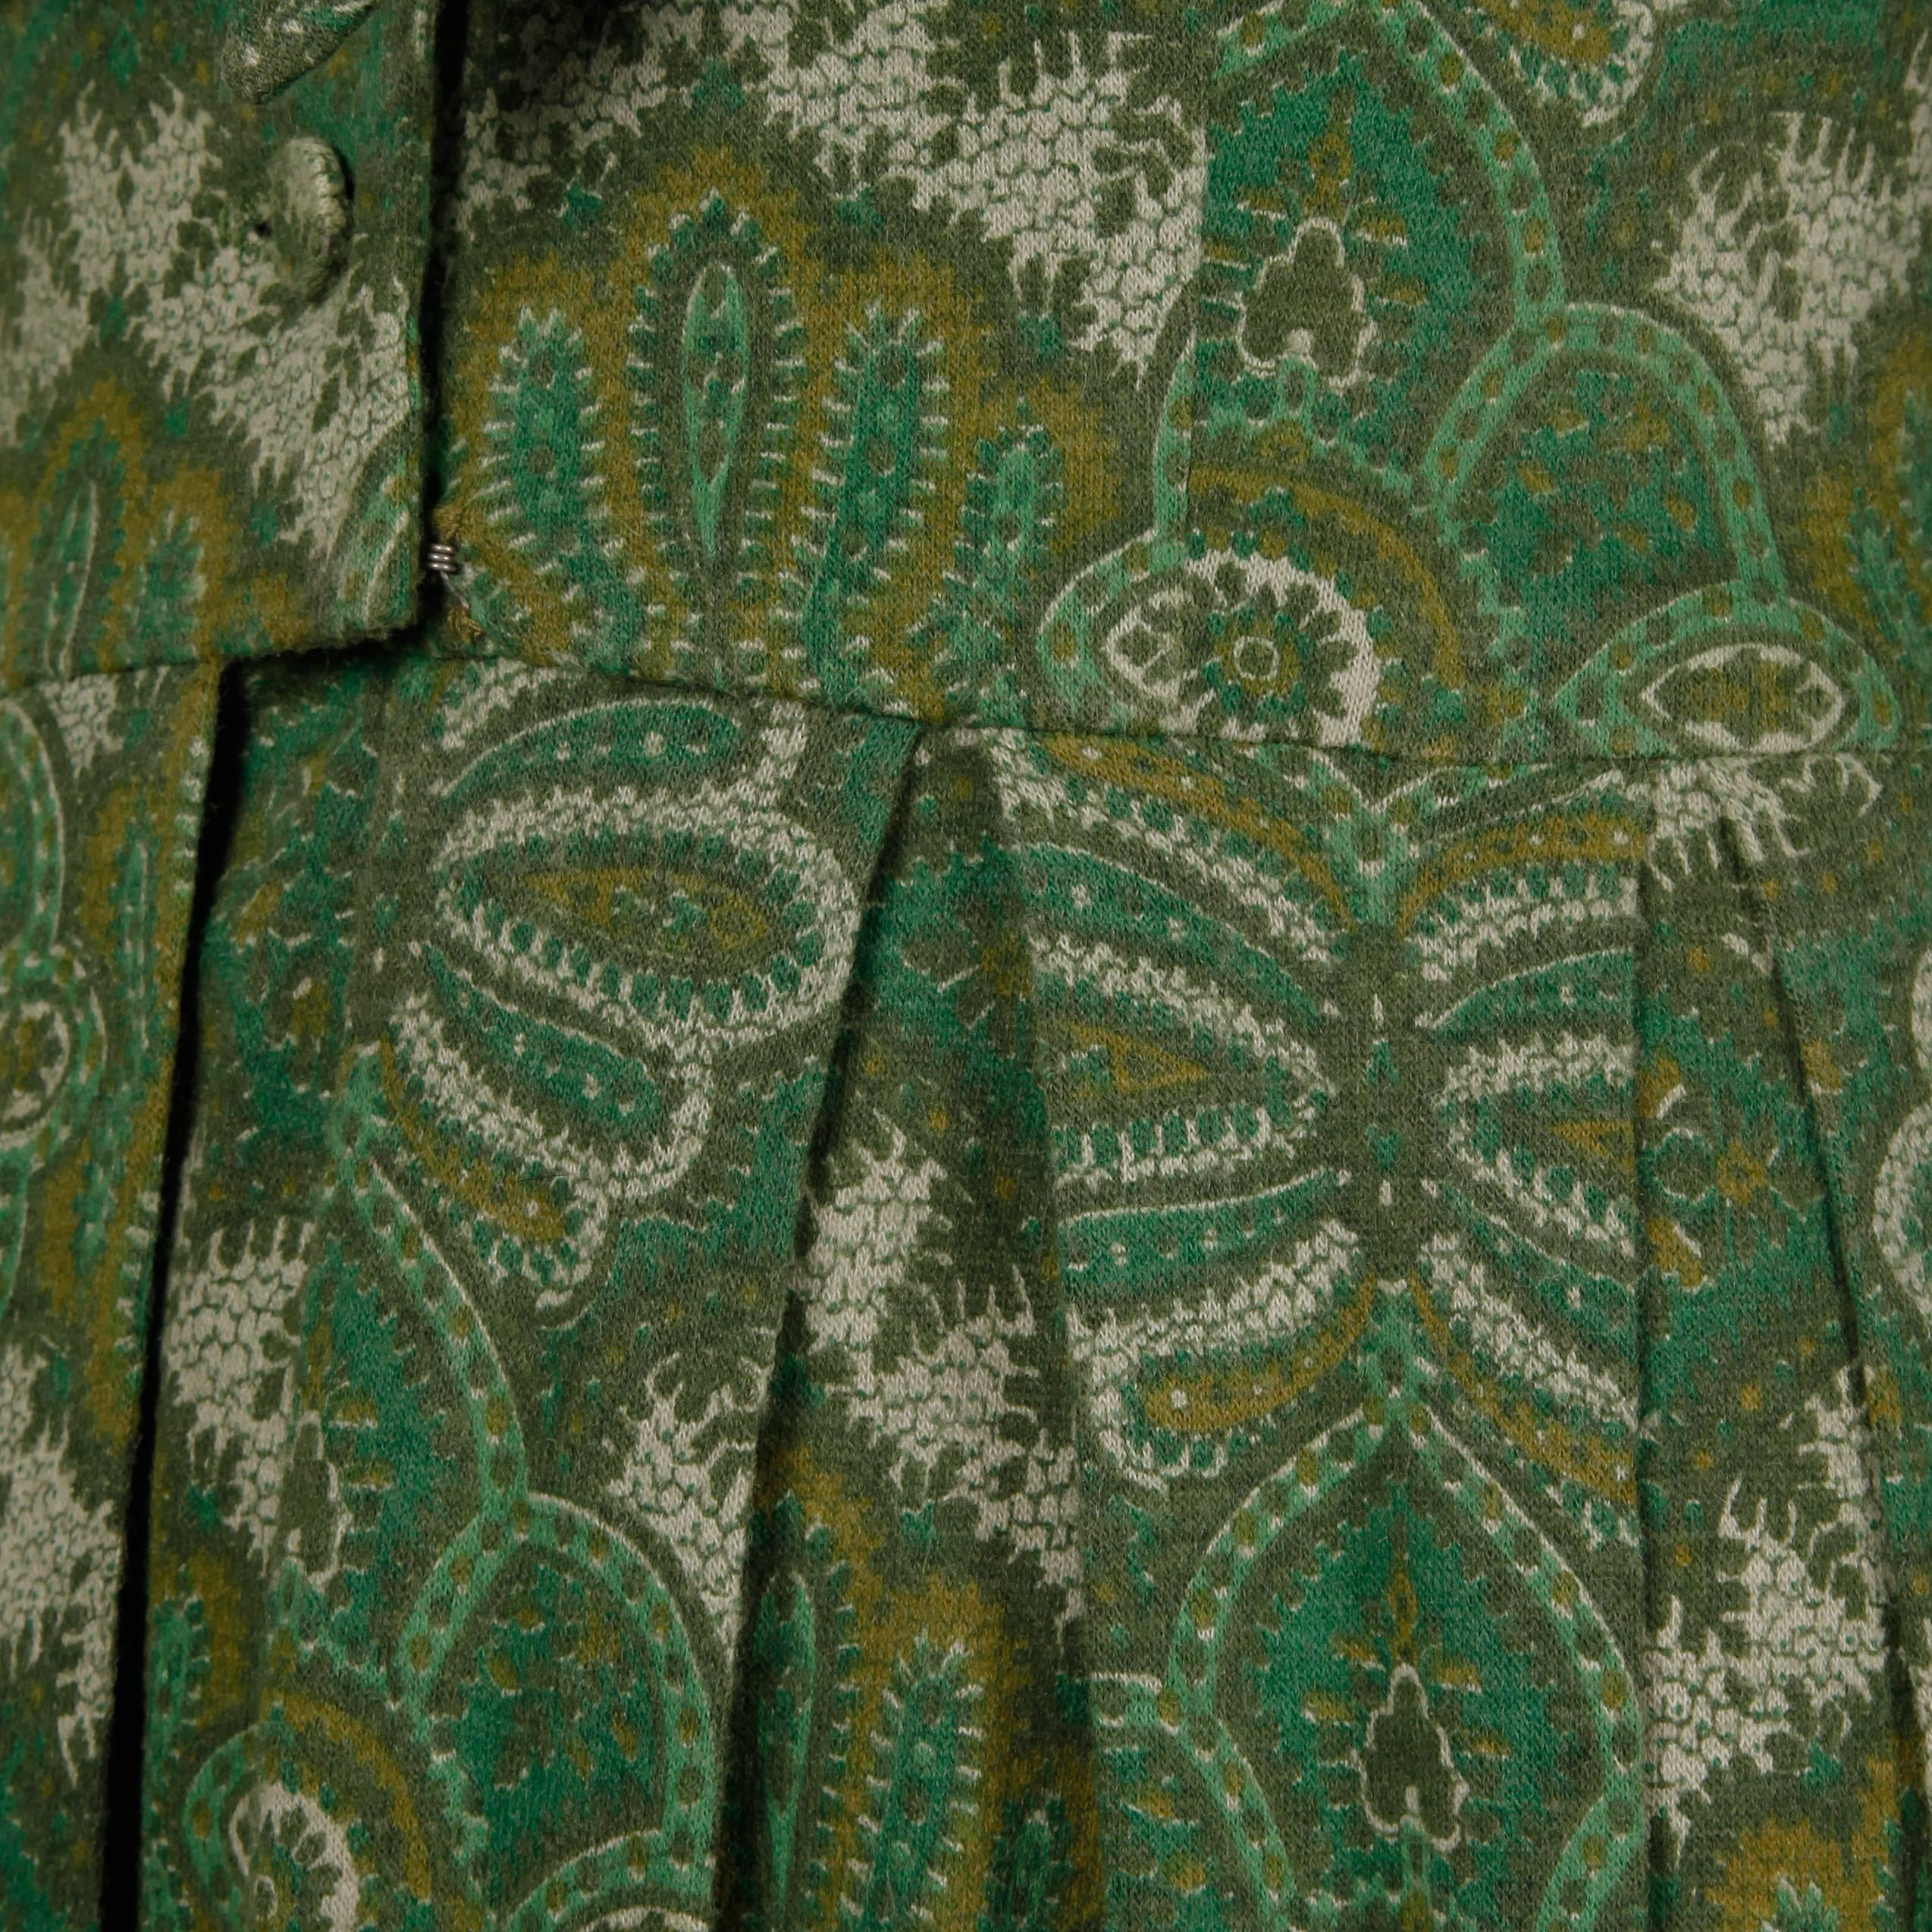 Women's 1950s Jerry Gilden Vintage Green Paisley Wool Day Dress with Ascot Bow Tie